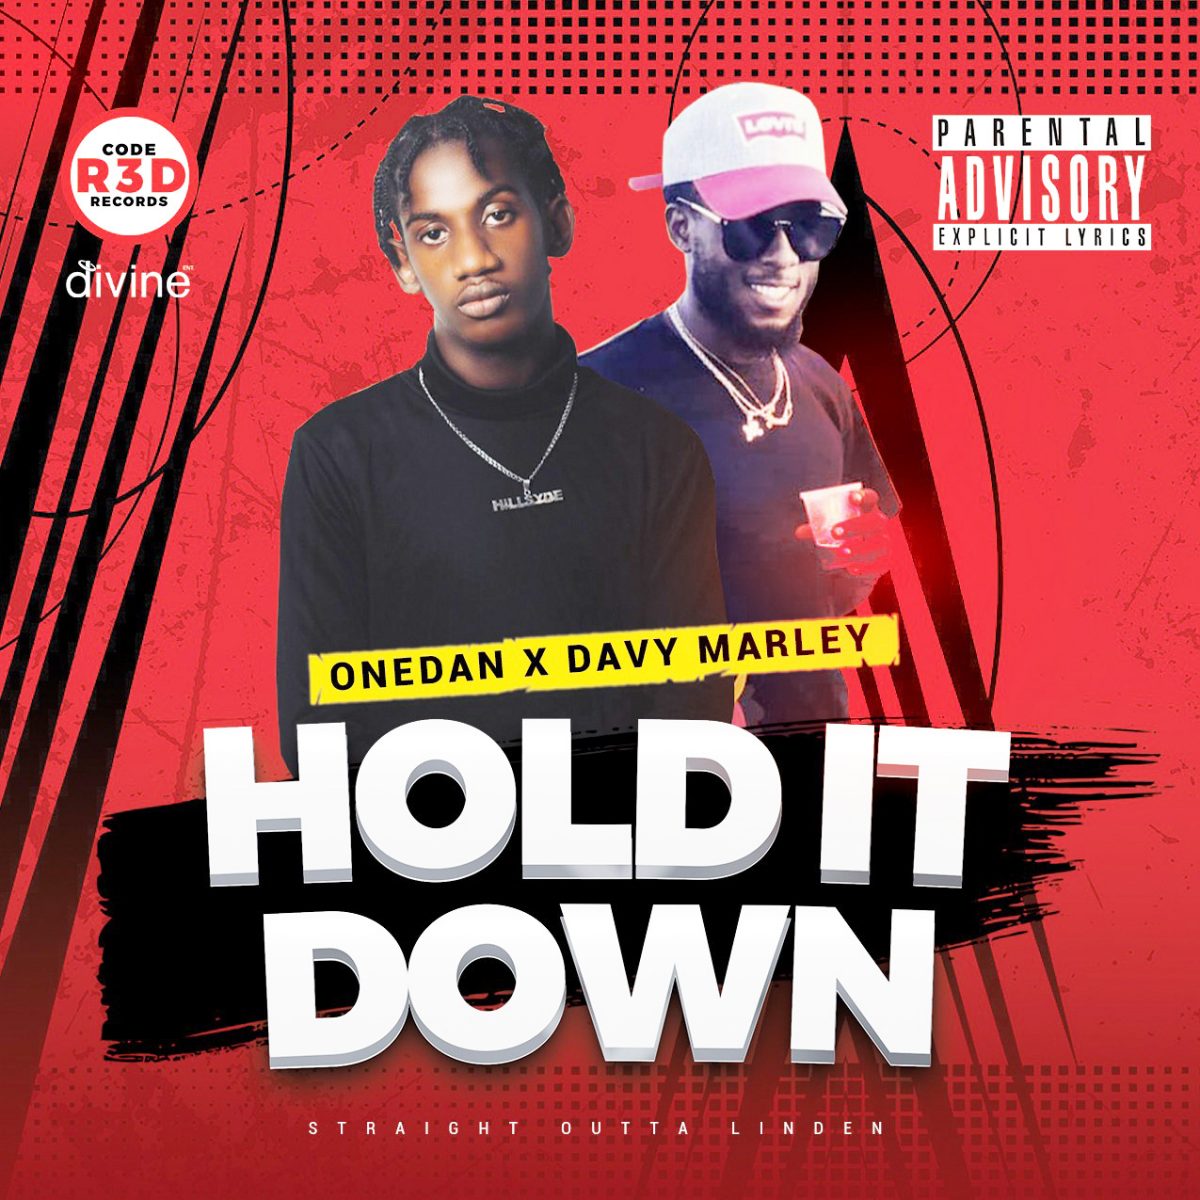 The cover of the new ‘Hold It Down’ song